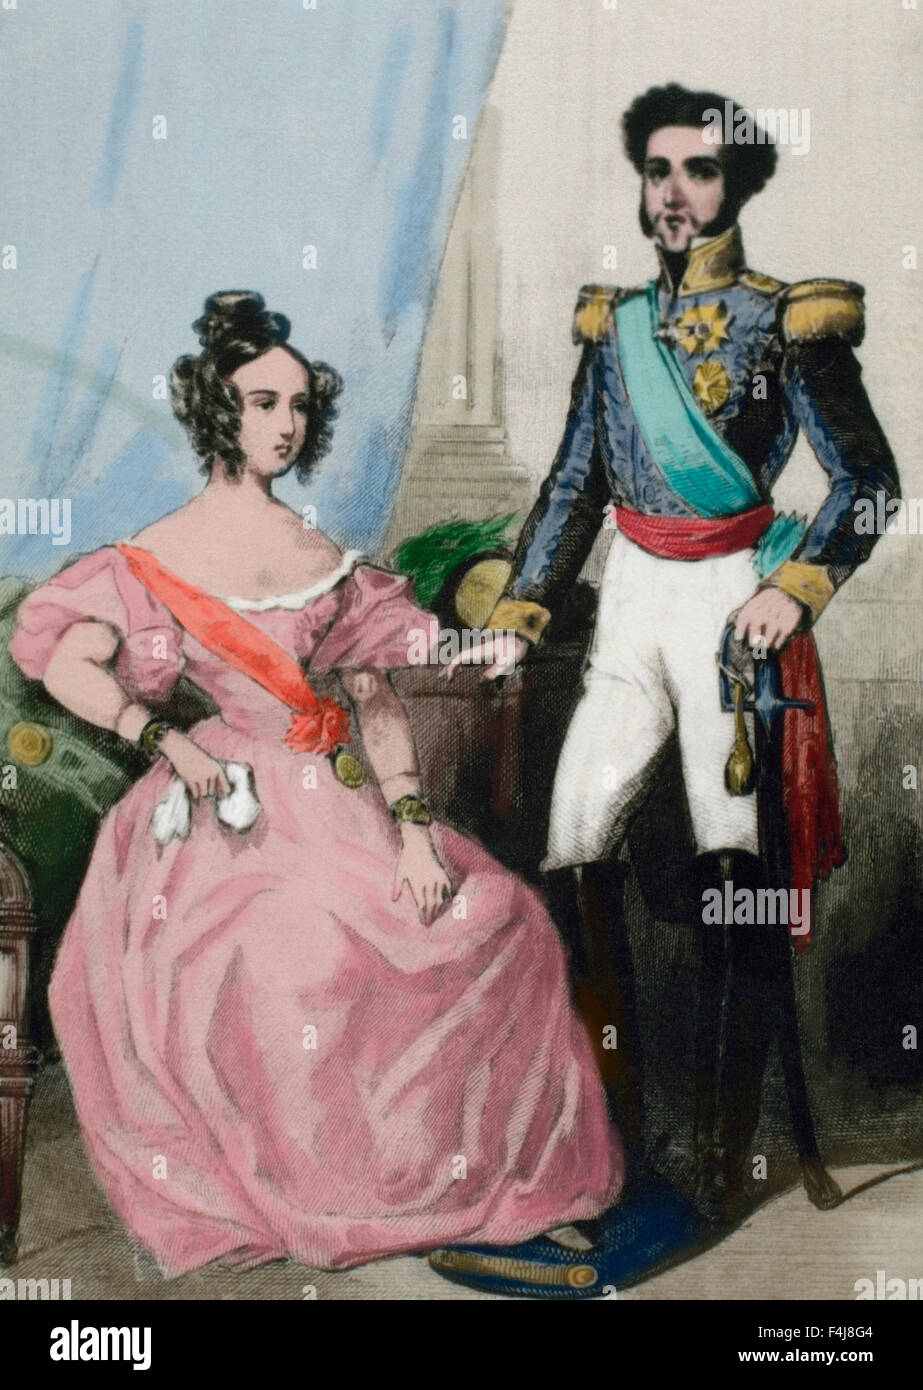 Maria I (1734-1816) Queen of Portugal, Brazil and Algarves. Peter III of Portugal (1717-1786). Engraving. 19th century. Colored. Stock Photo